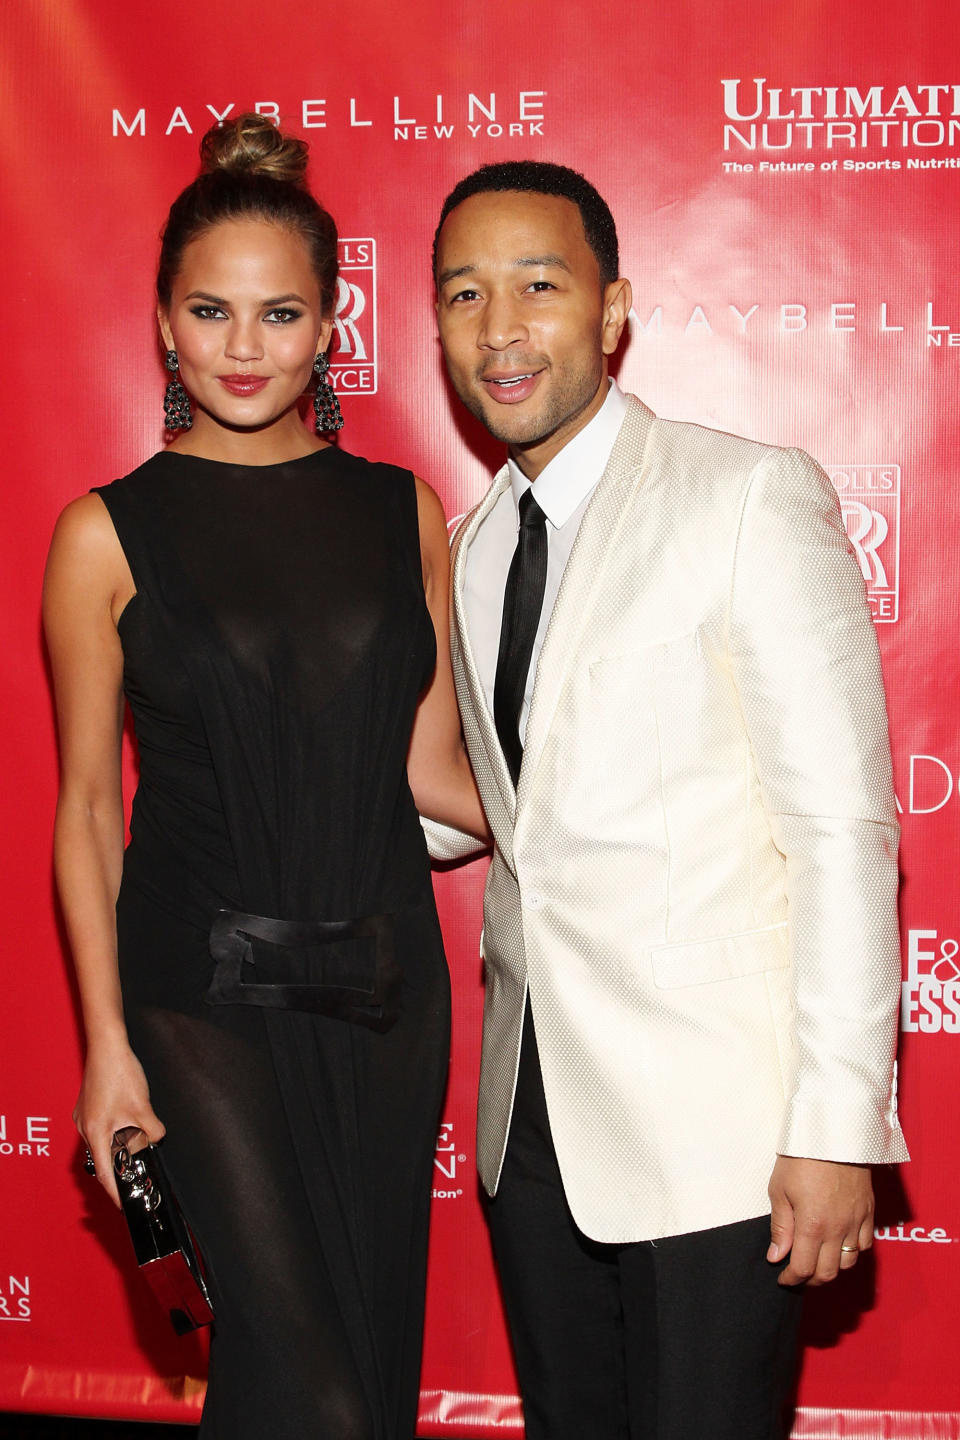 NEW YORK, NY - JANUARY 31:  Christine Teigen and John Legend attend Super Bowl XLVIII Party Hosted By Shape And Men's Fitness at Cipriani 42nd Street on January 31, 2014 in New York City.  (Photo by Mireya Acierto/Getty Images)